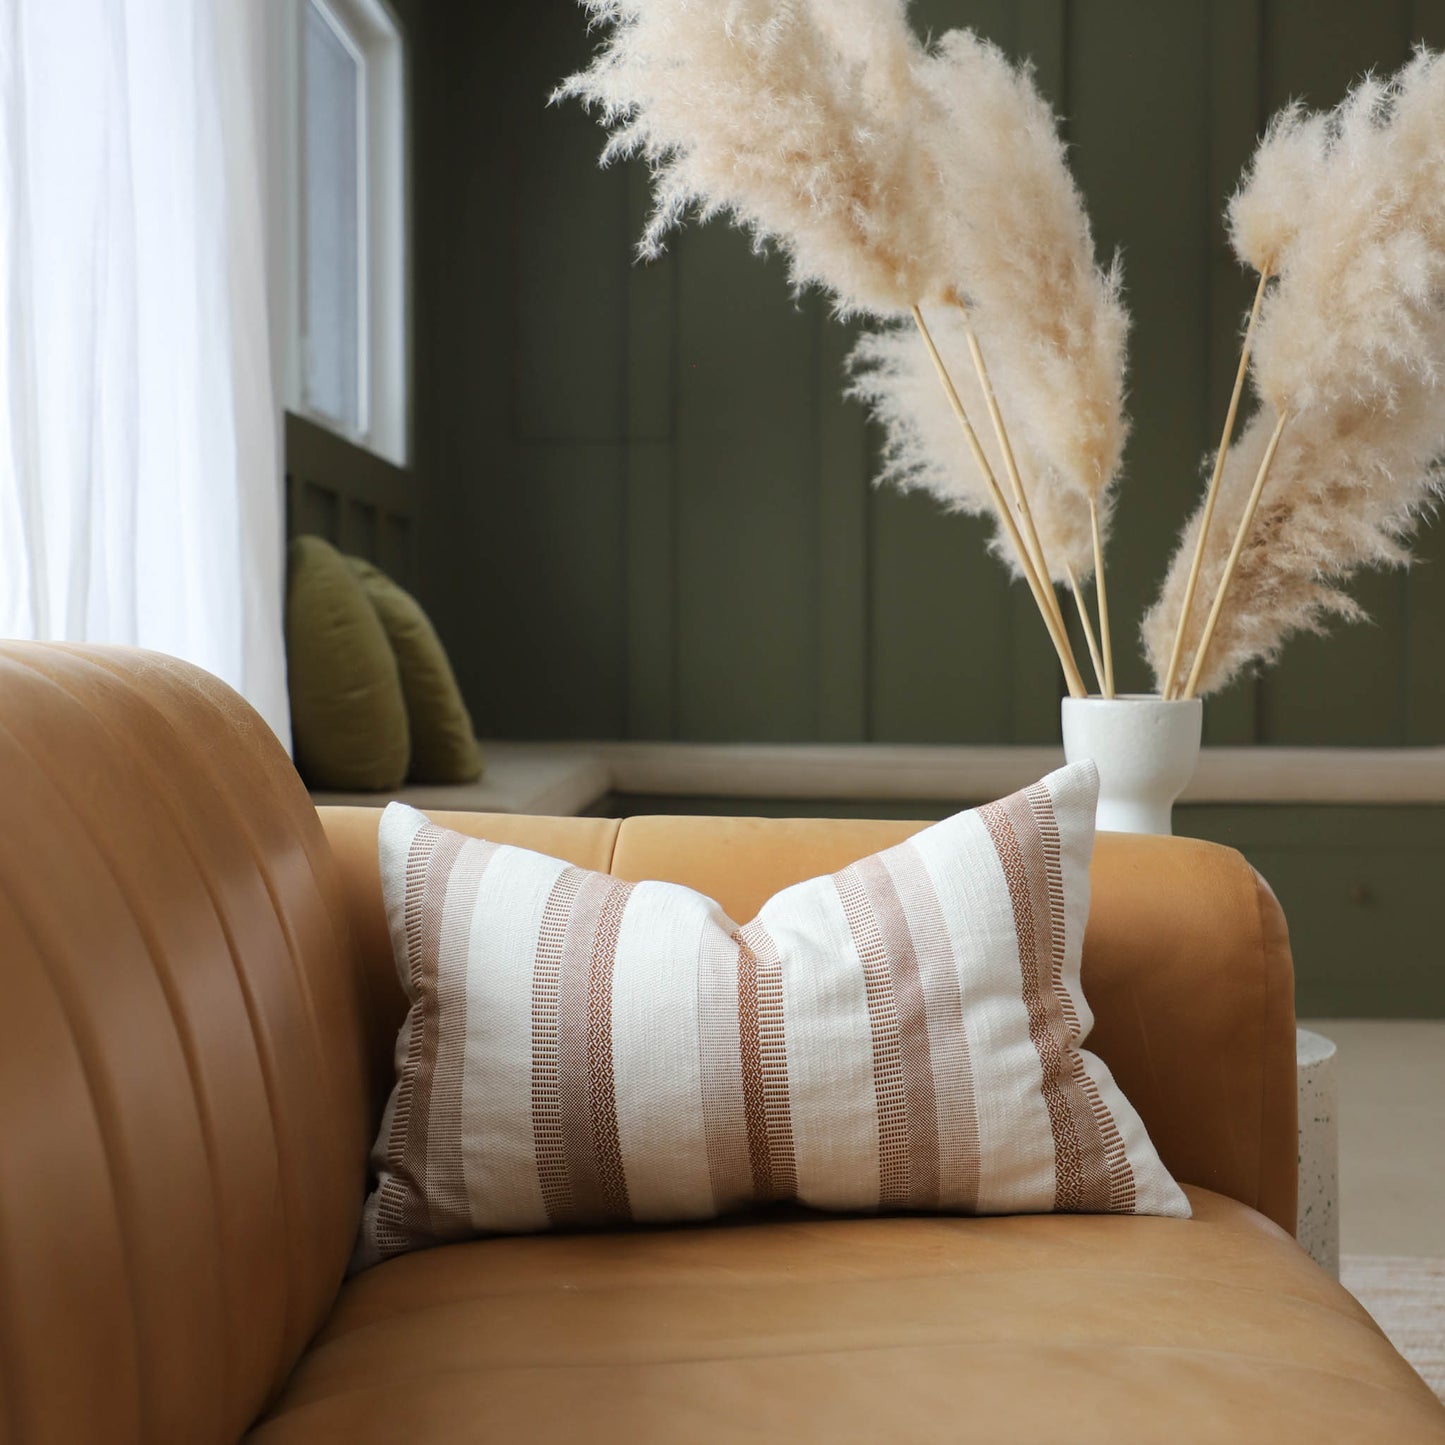 The Cabana Pillow is a gorgeous striped lumbar with an authentic, classy look and feel. 